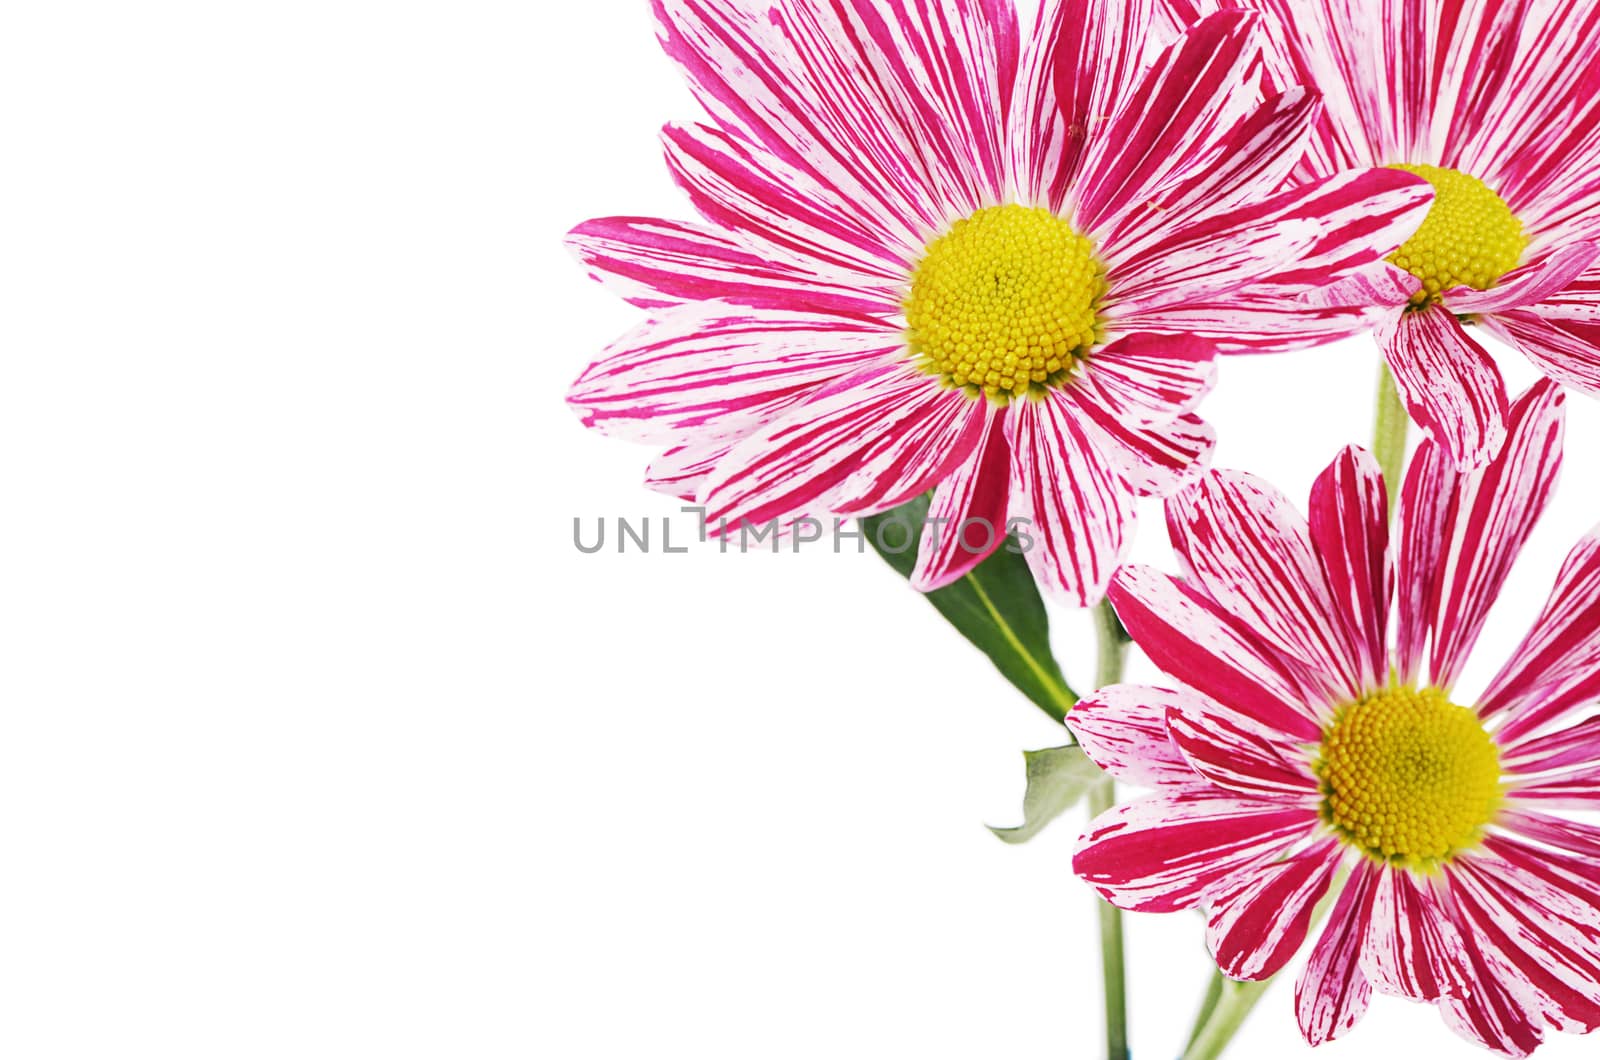 Flower pink chrysanthemums on isolated white background